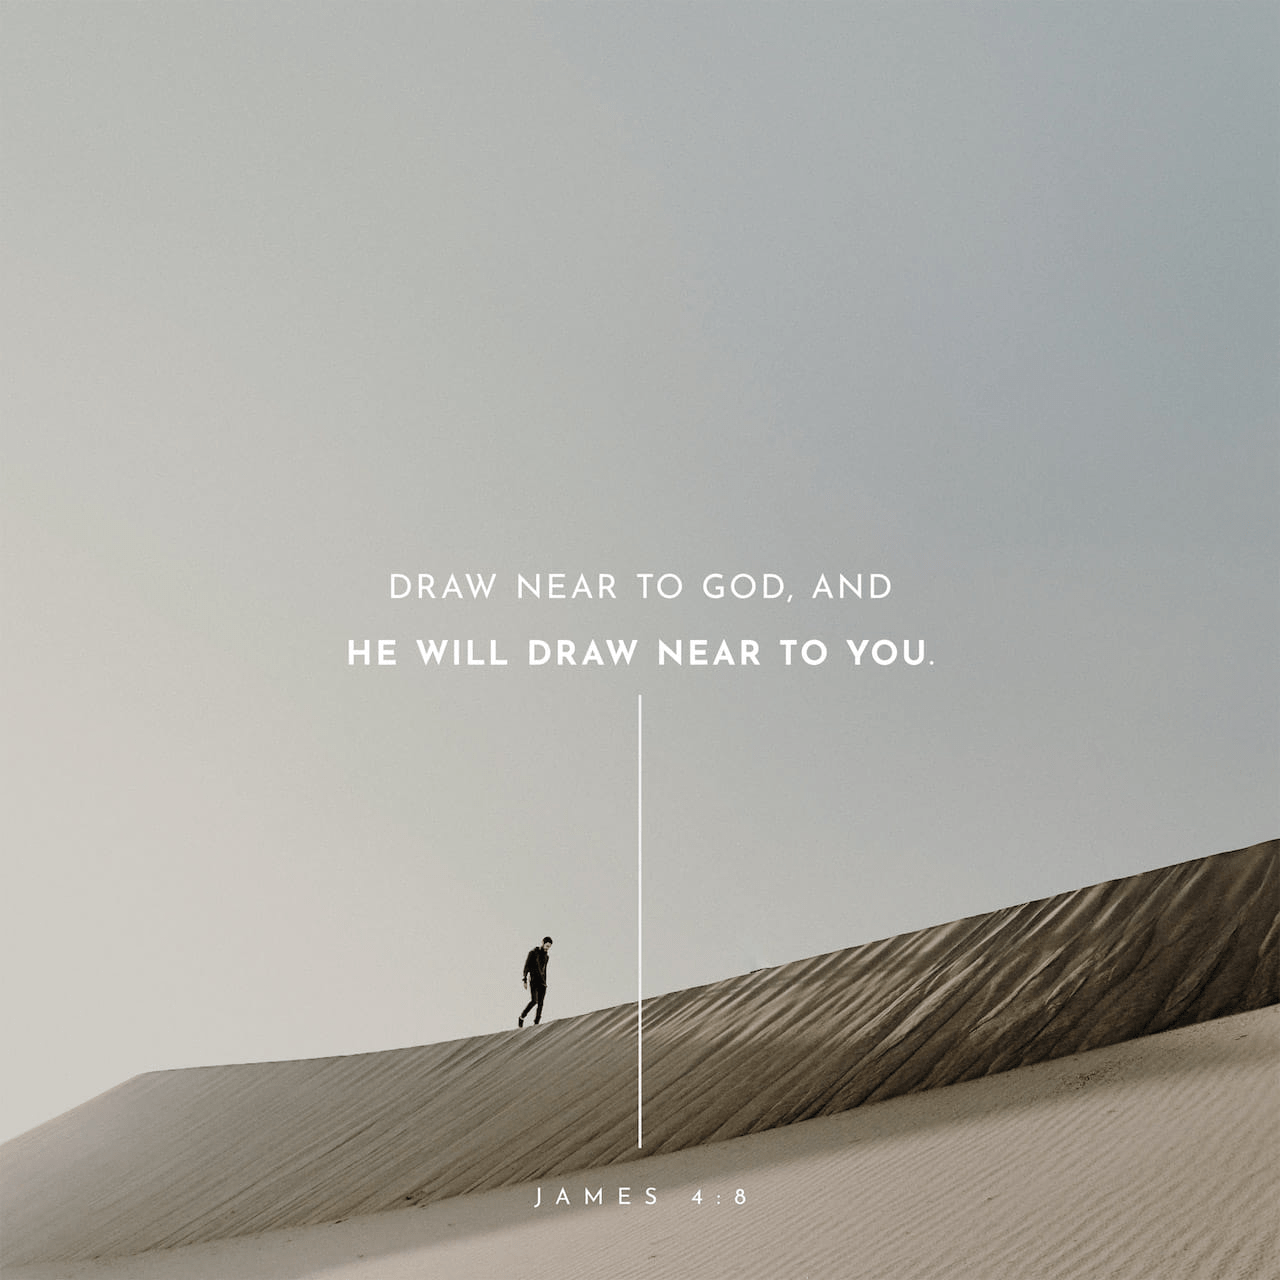 VOTD April 16 - “Draw near to God and He will draw near to you. Cleanse your hands, you sinners; and purify your hearts, you double-minded.” ‭‭James‬ ‭4:8‬ ‭NASB‬‬